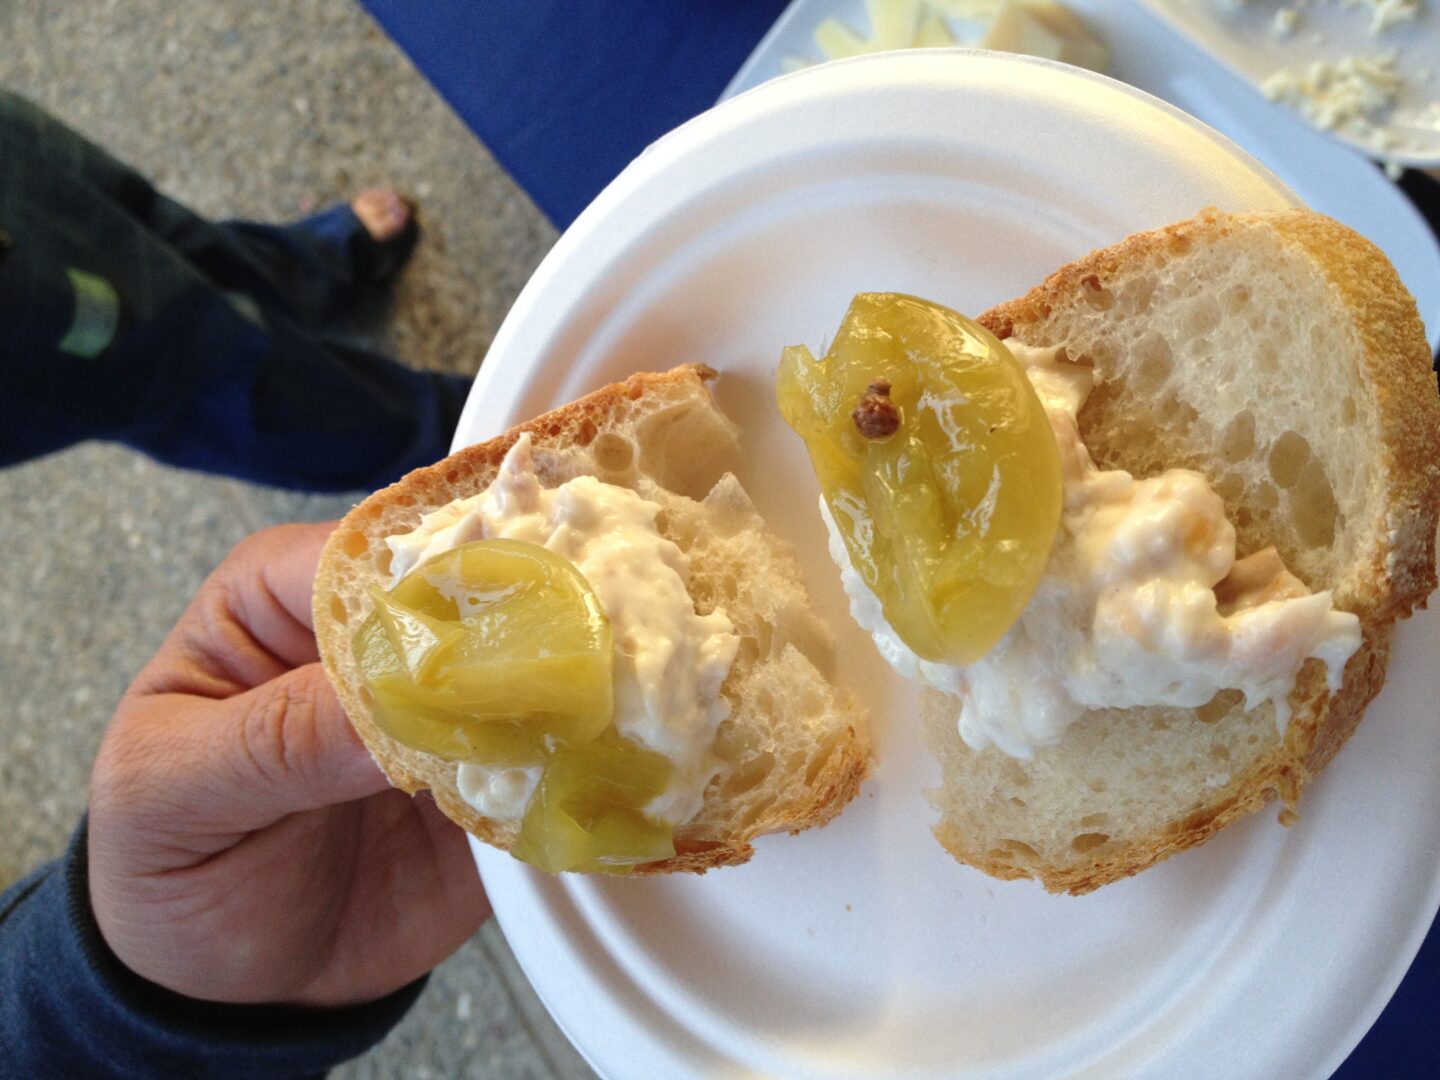 A person holding a sandwich with cheese and pickles on a paper plate.